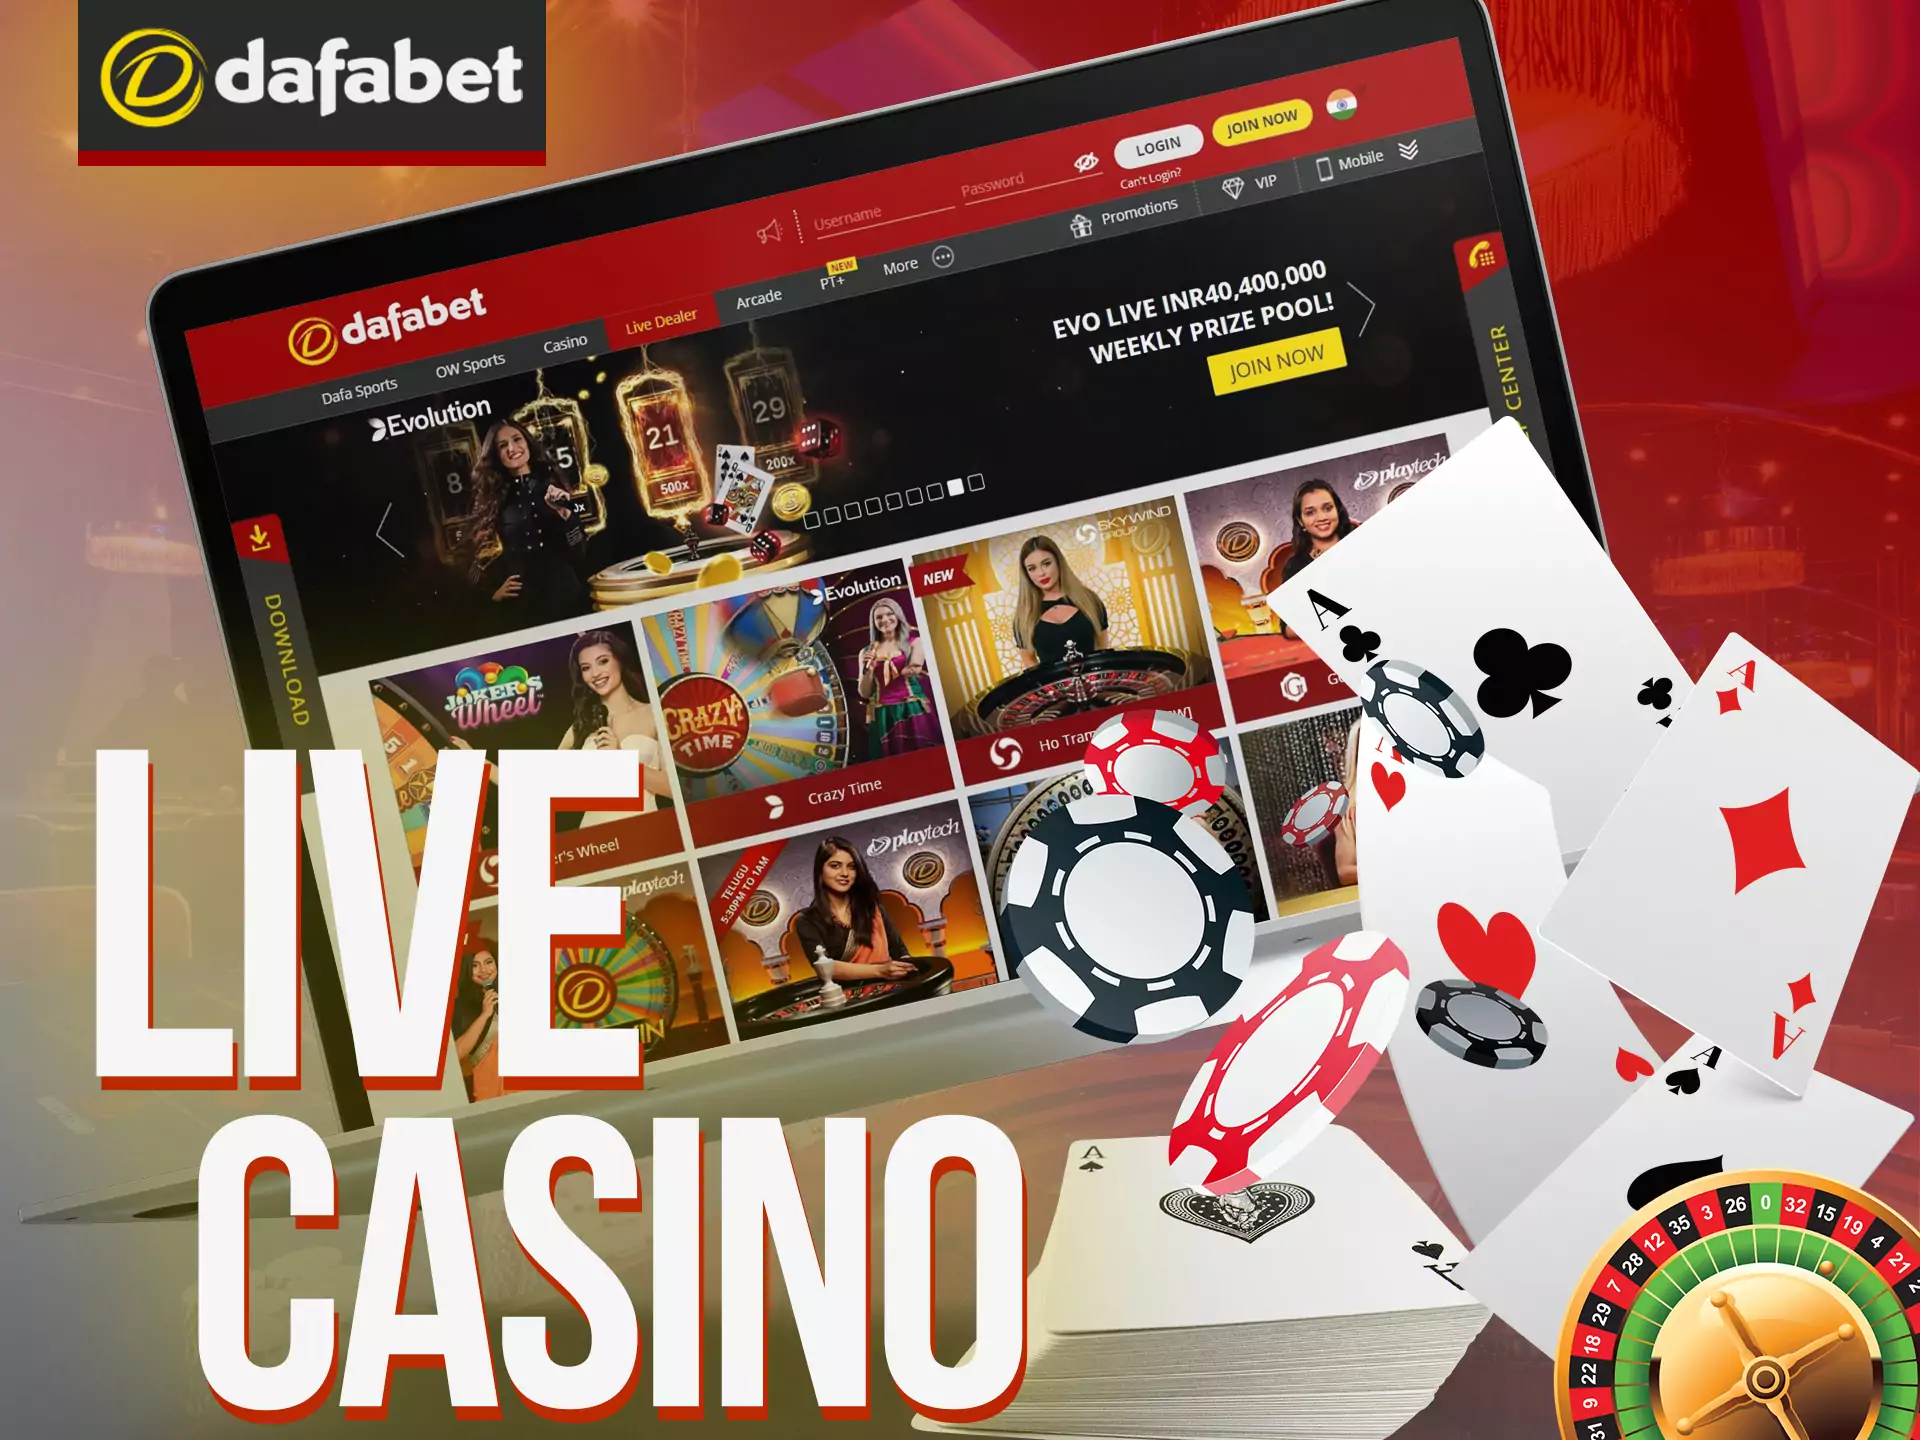 Play your favorite live casino games at Dafabet.